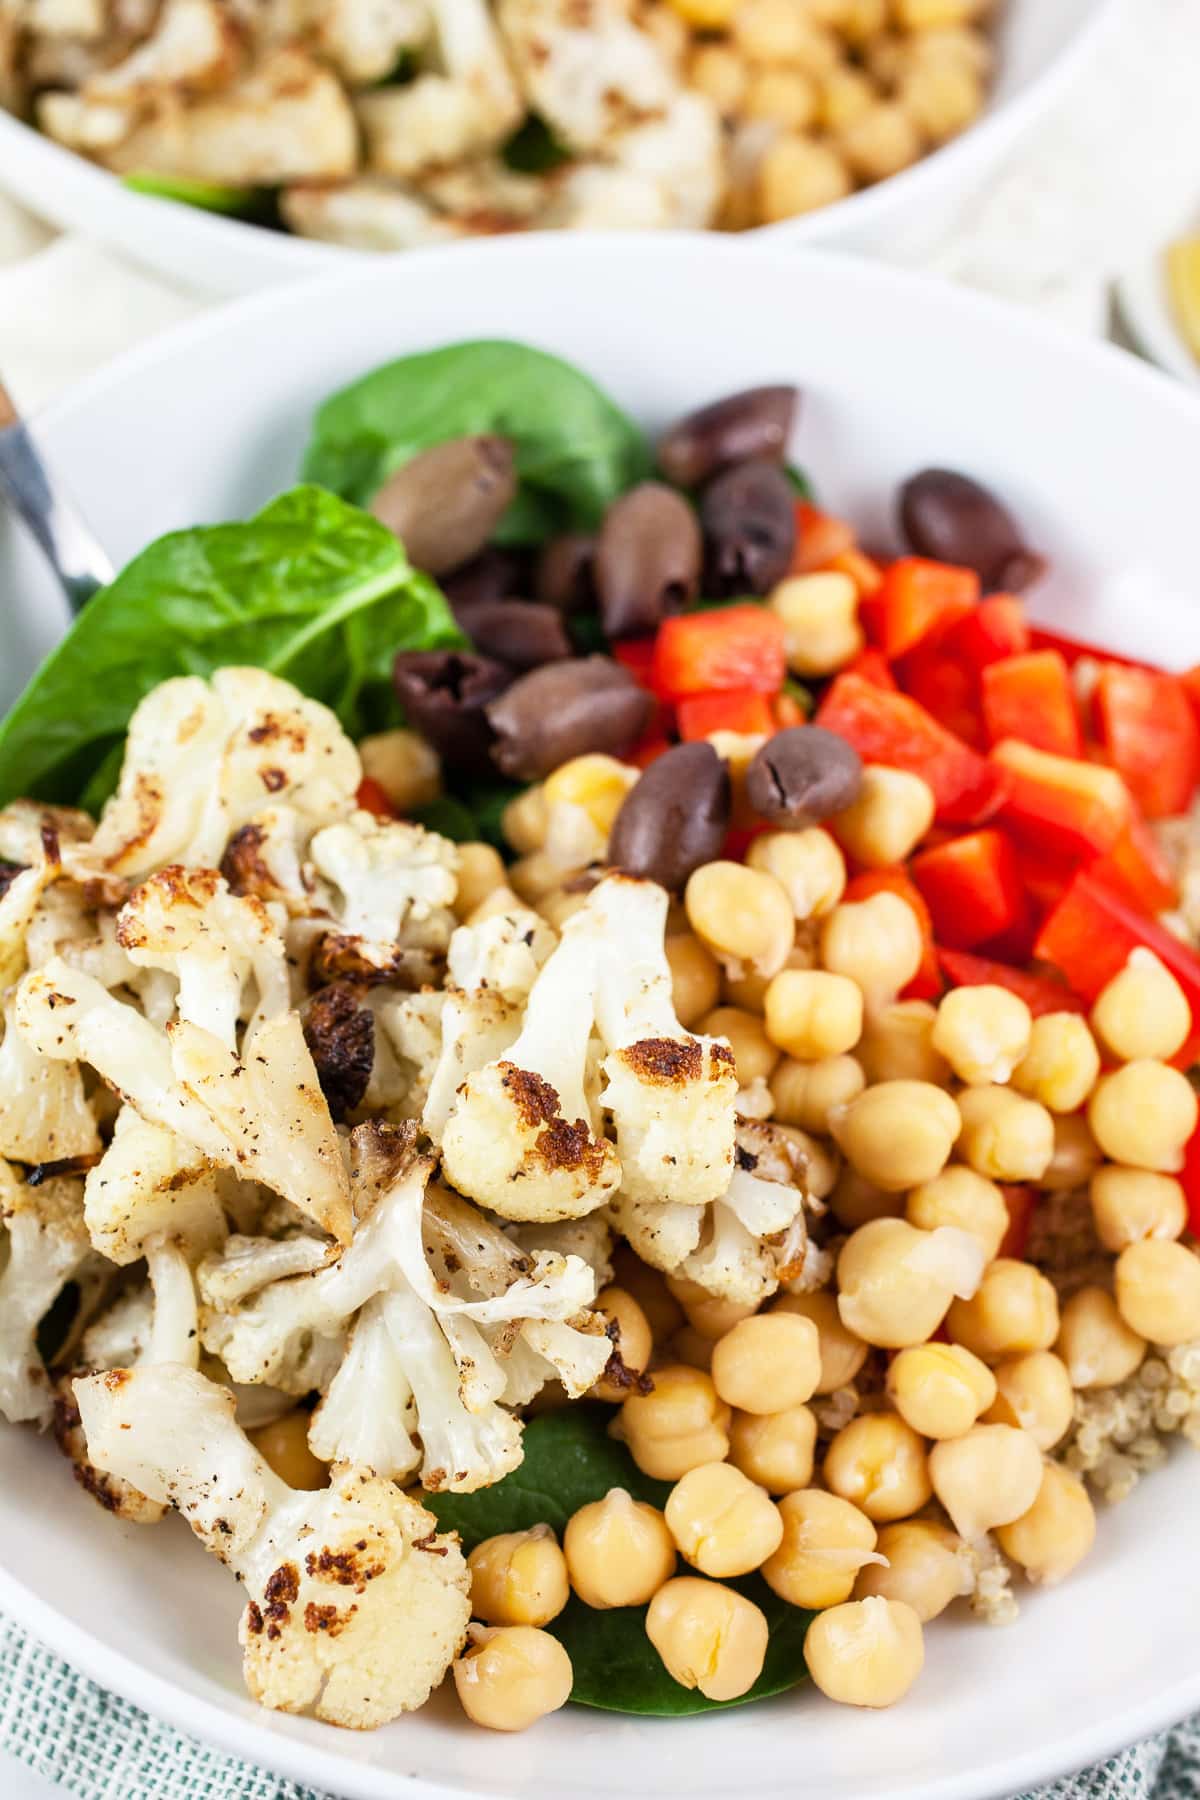 Mediterranean chickpea bowls with cauliflower, red bell pepper, Kalamata olives, and spinach.